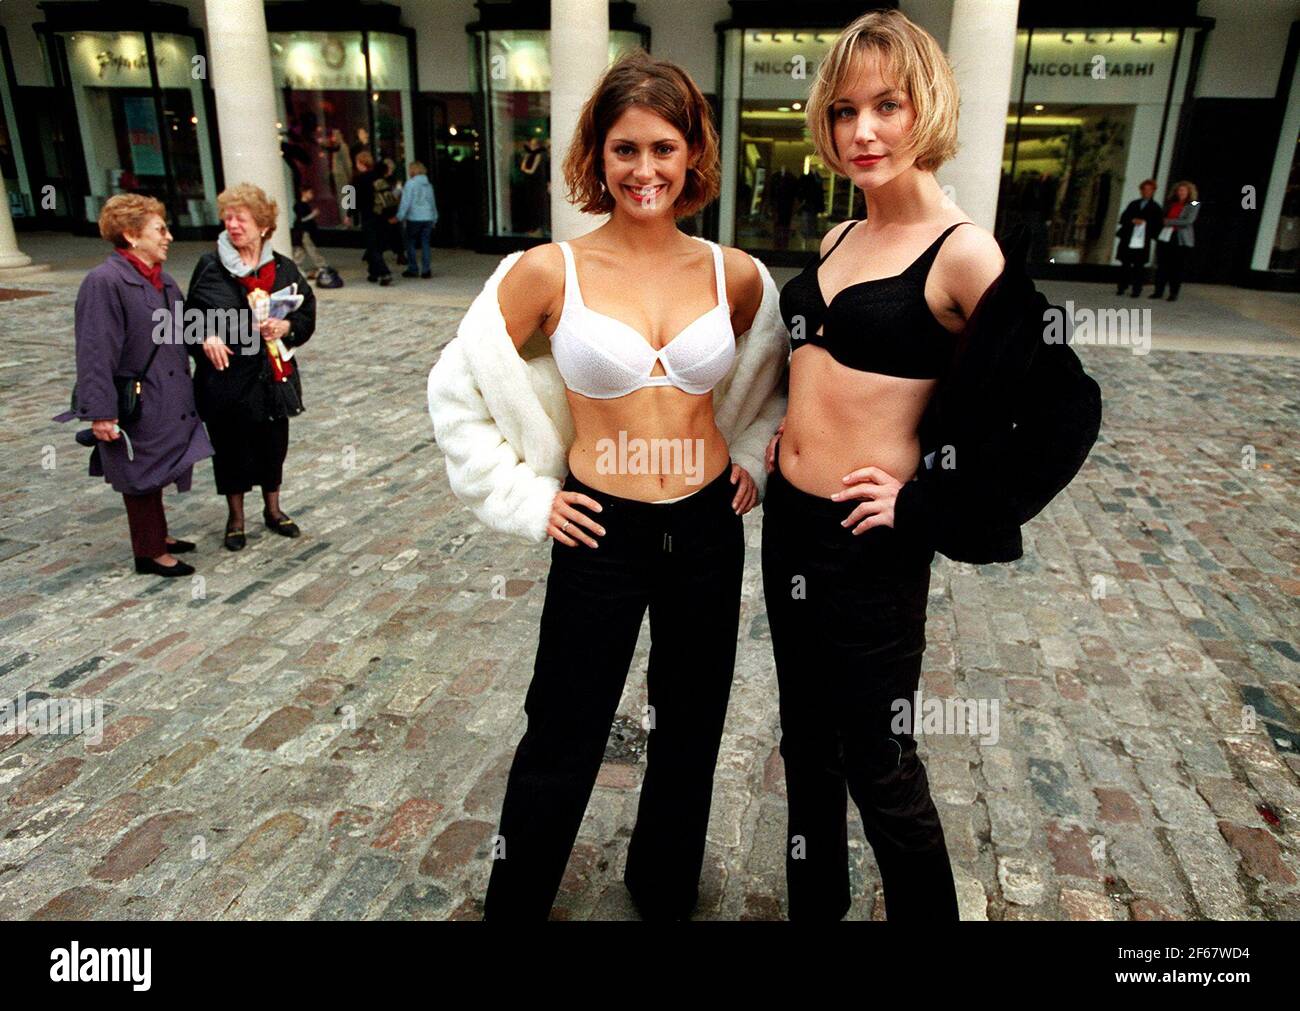 TWO GIRLS MODEL THE NEW BIOFORM BRA FROM CHARNOS CREATED BY DESIGNERS  SEYMOUR POWELL. THE DESIGN OF THE BRA WILL APPARENTLY REVOLUTIONISE THE WAY  BRAS HAVE BEEN PREVIOUSLY MADE Stock Photo 